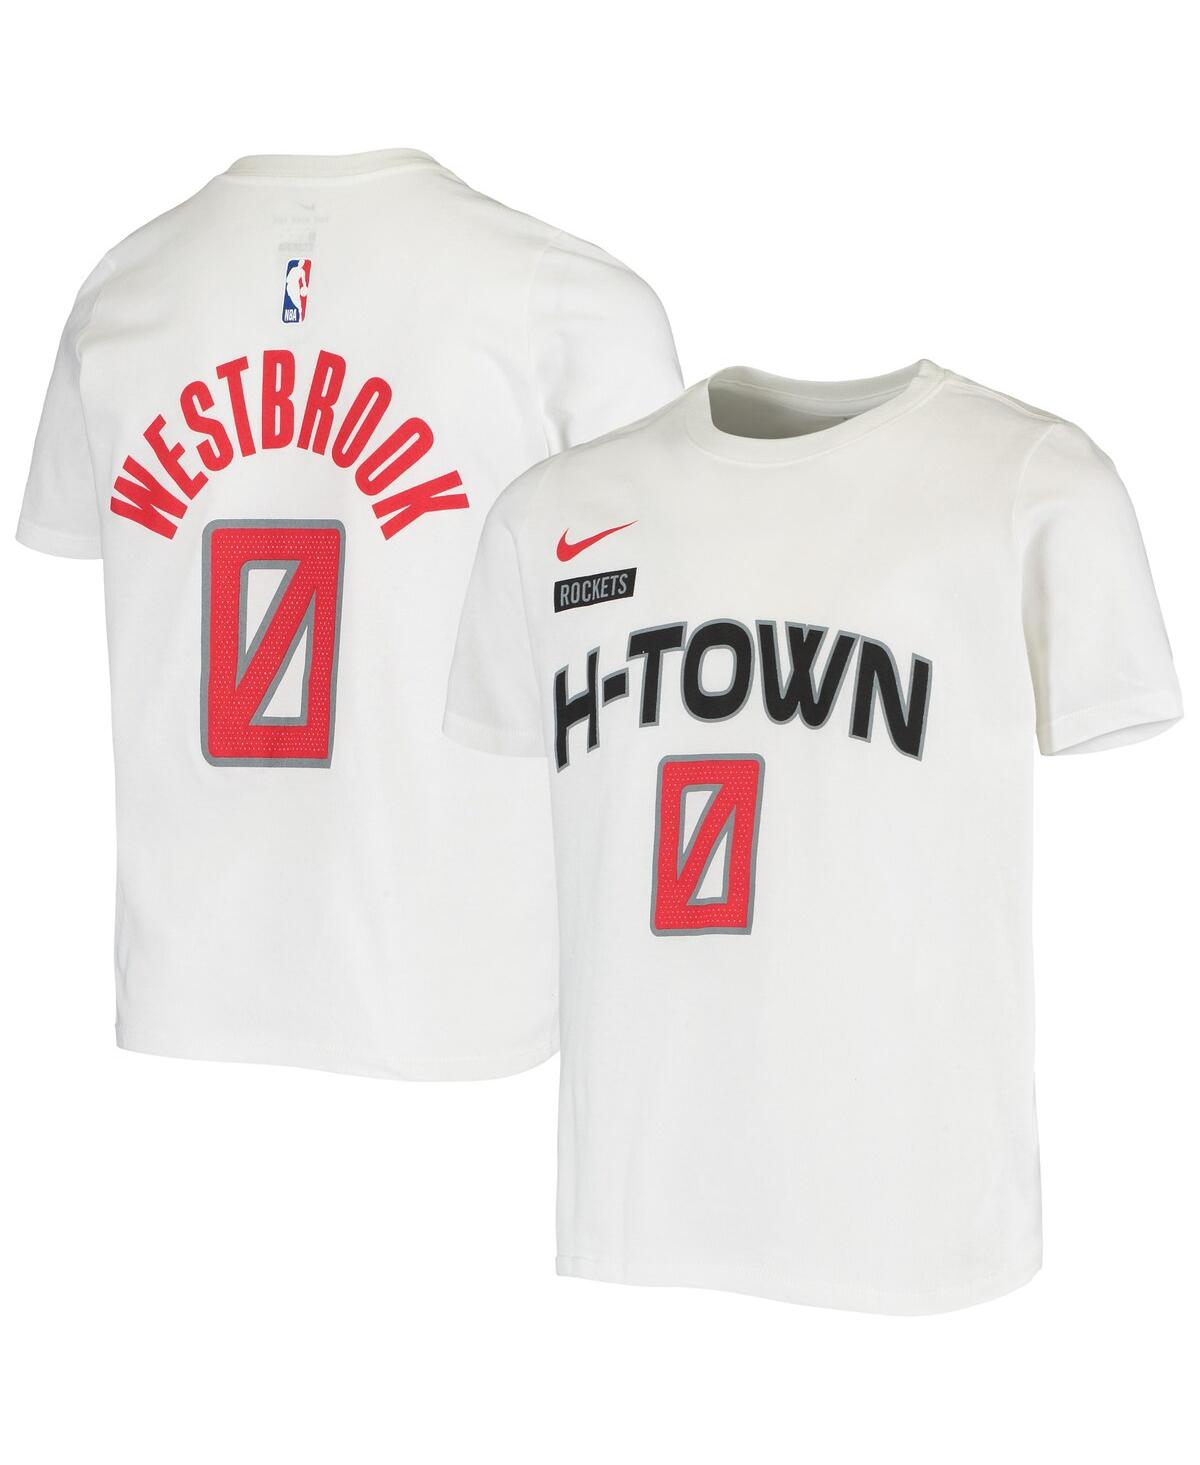 Youth Boys Nike Russell Westbrook White Houston Rockets Name and Number Performance T-shirt